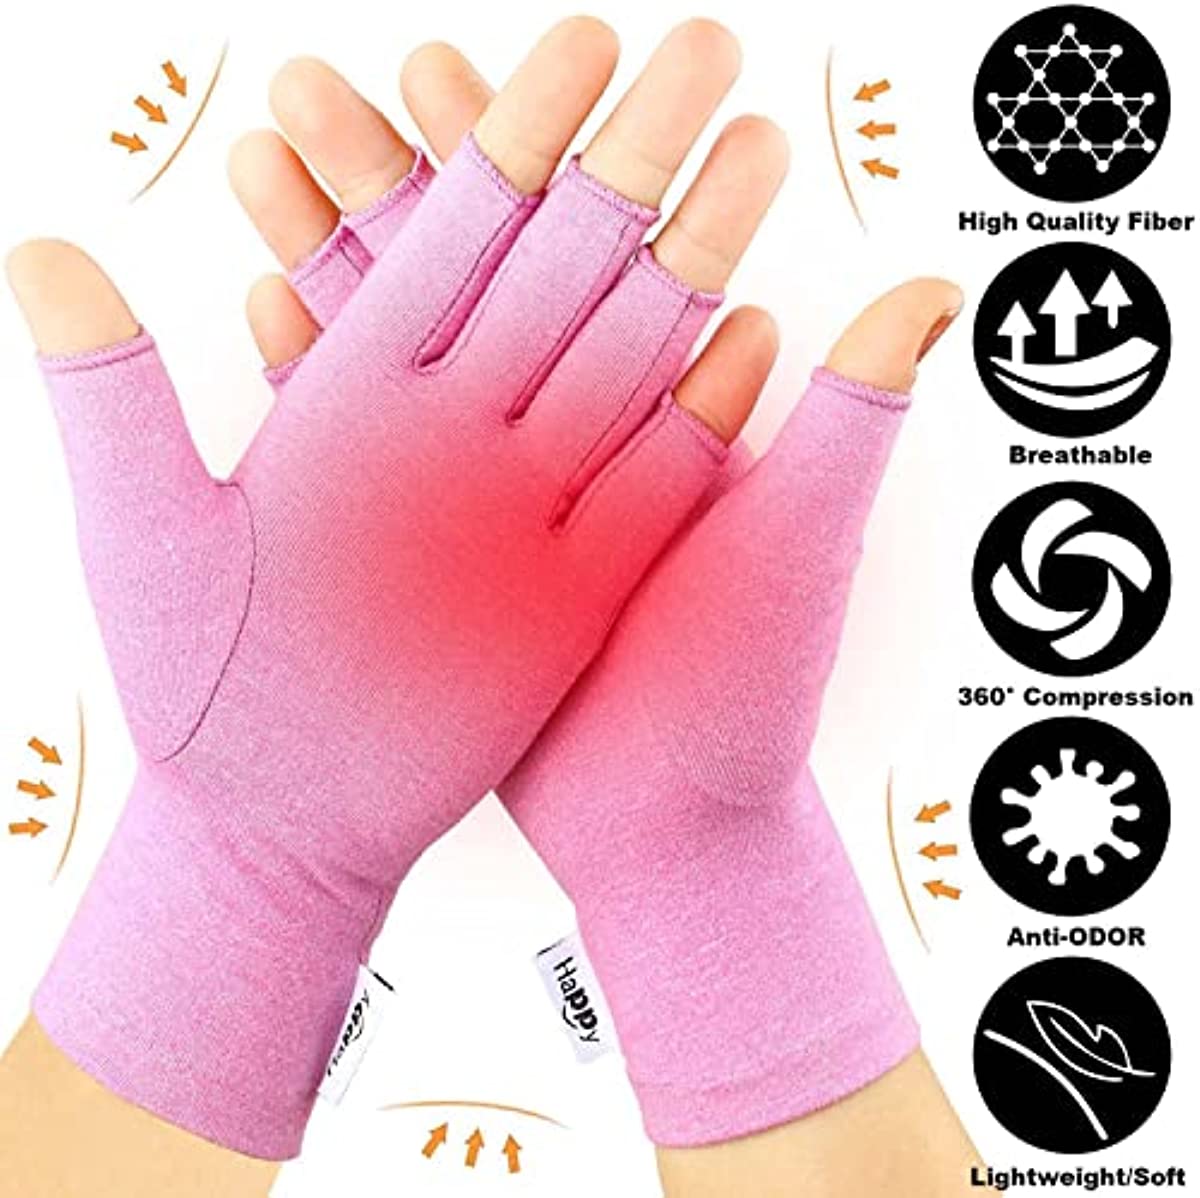 2 Pairs Arthritis Gloves Compression Gloves for Rheumatoid & Osteoarthritis,Joint Pain Relief, Carpal Tunnel Wrist Support,Computer Typing,Fingerless Gloves for Women (Purple, Small)